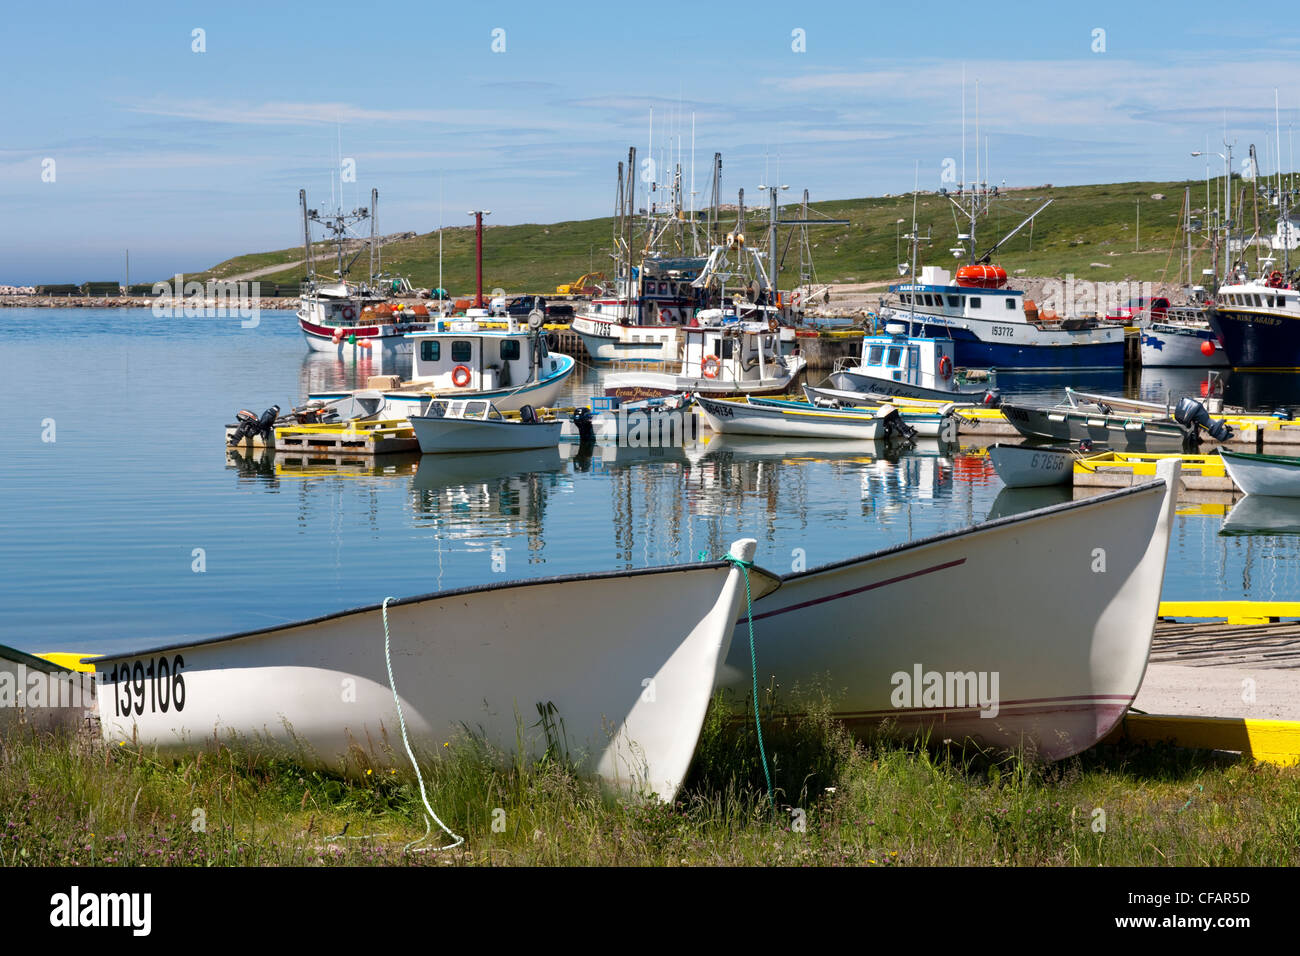 Fishing boats tied up at the wharf in Old Perlican, Newfoundland and Labrador, Canada. Stock Photo